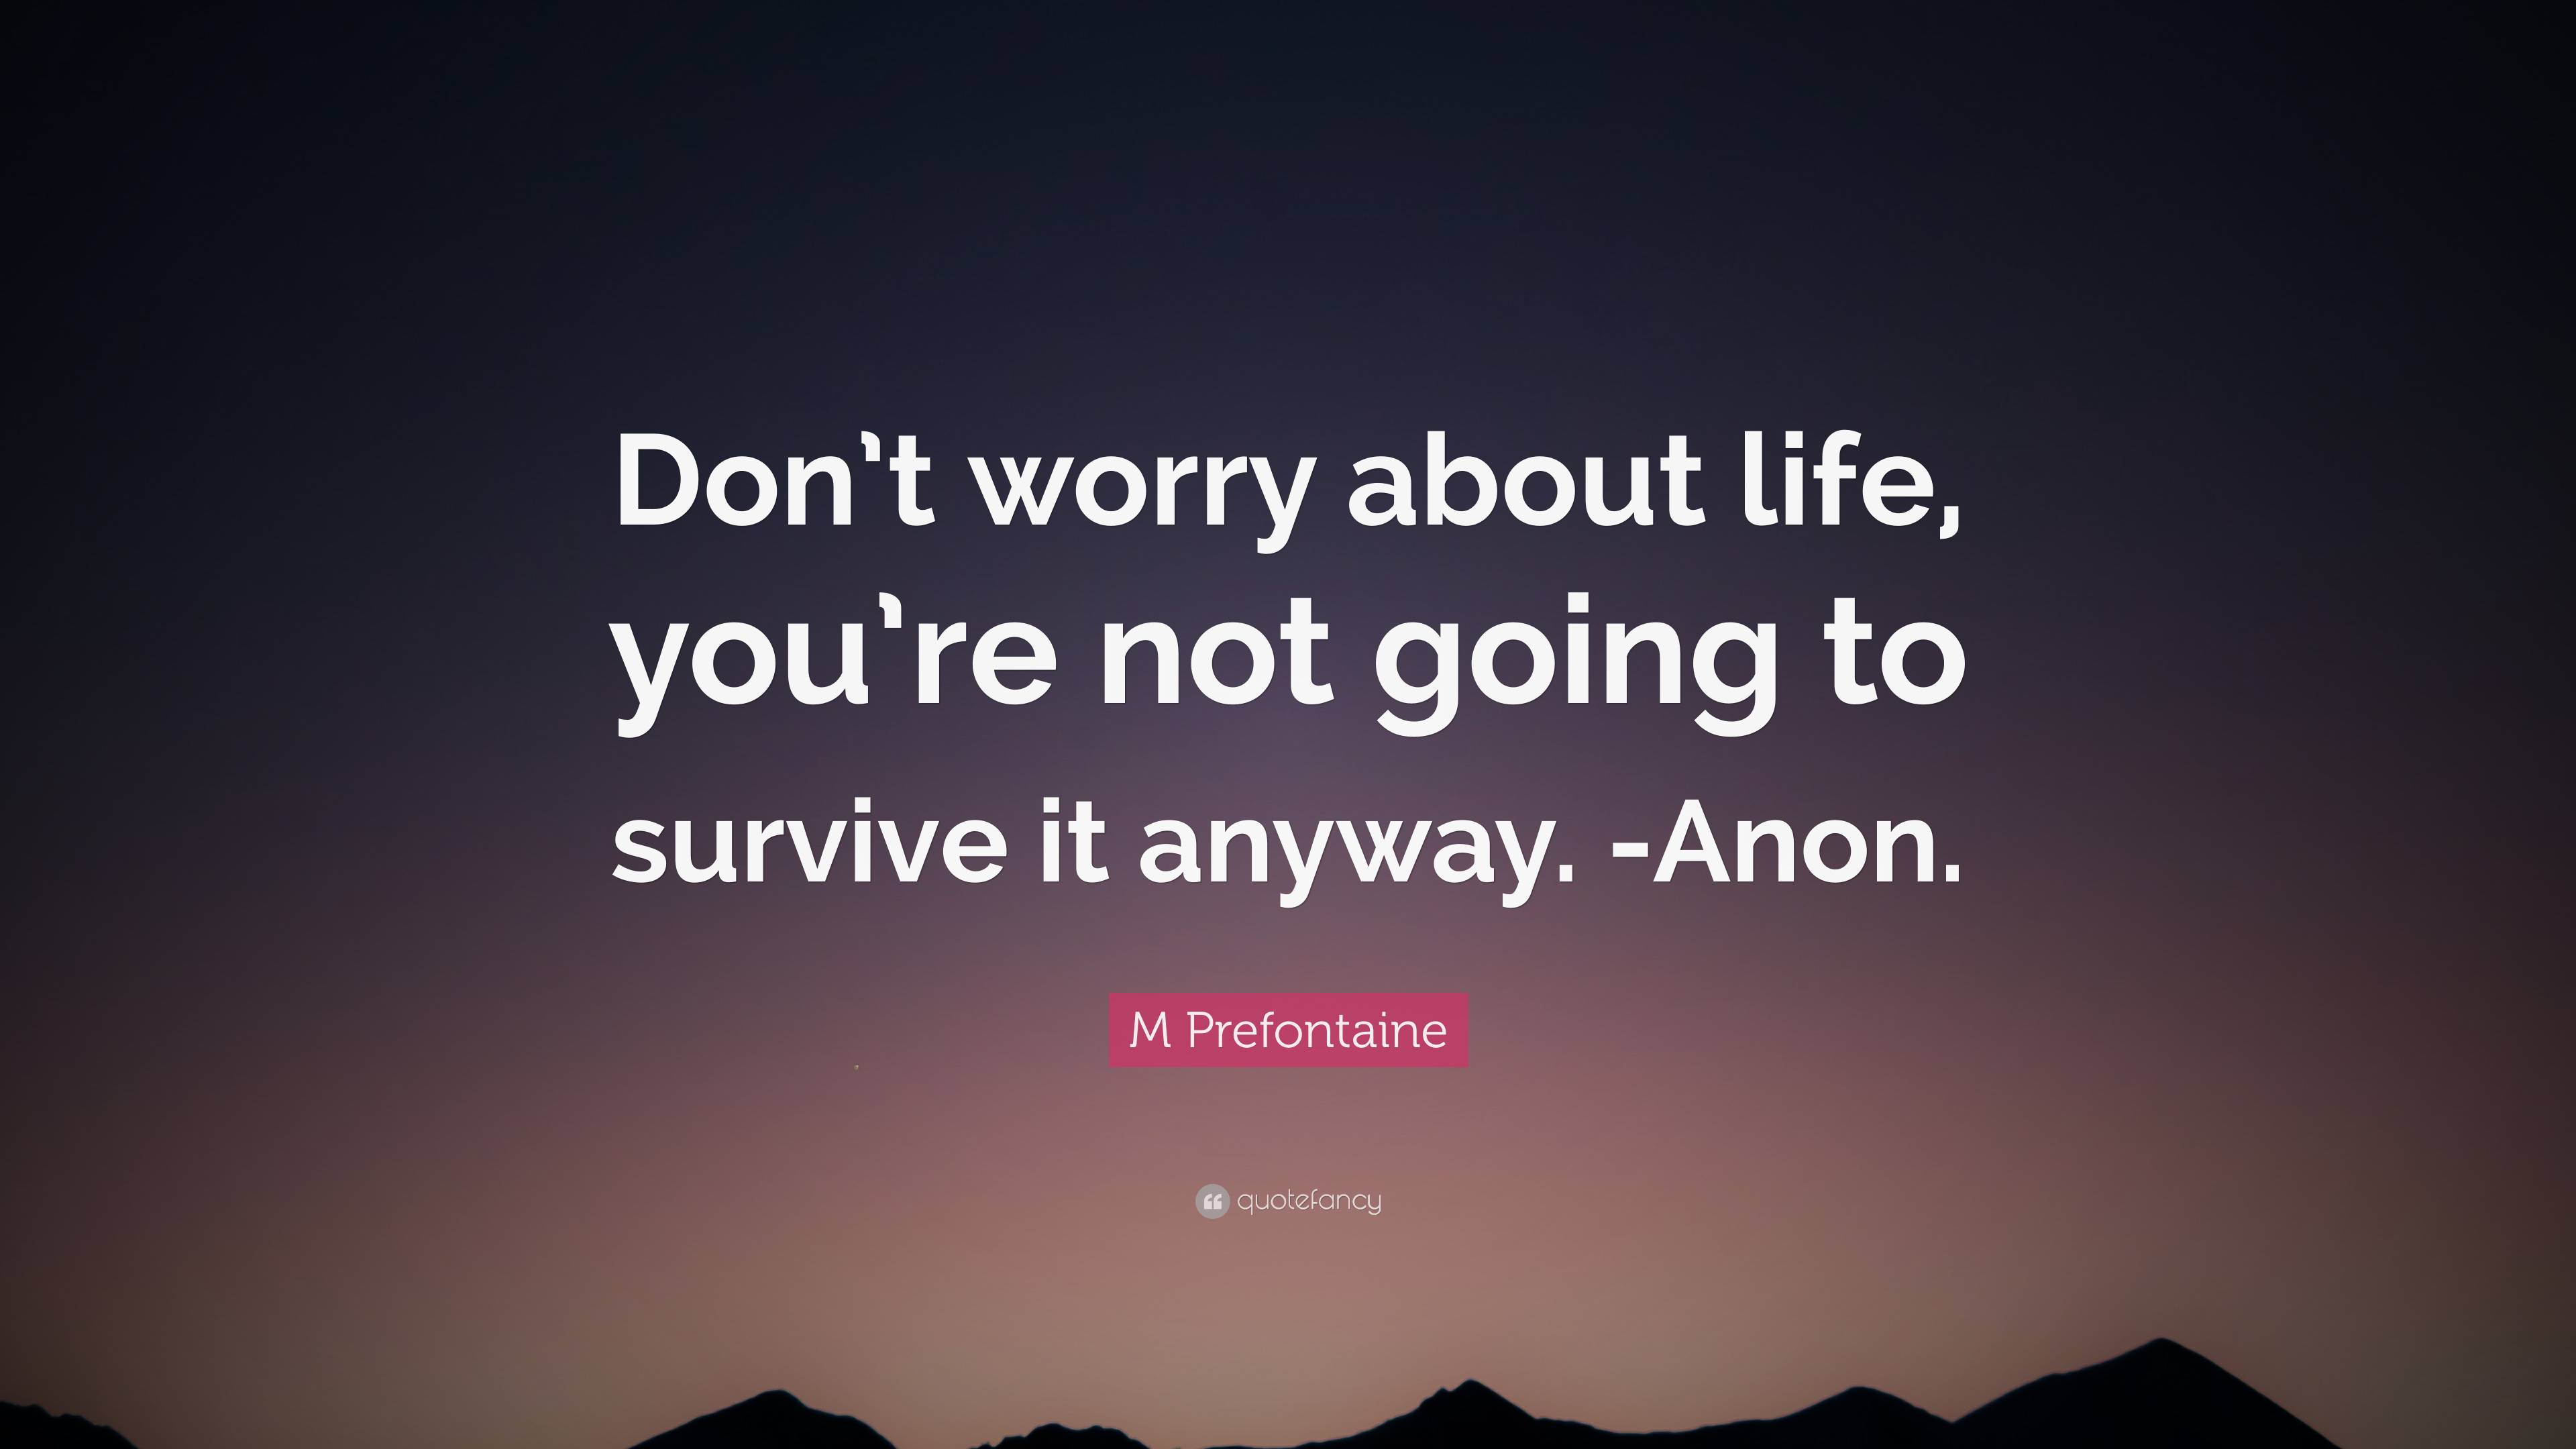 M Prefontaine Quote: “Don’t worry about life, you’re not going to ...